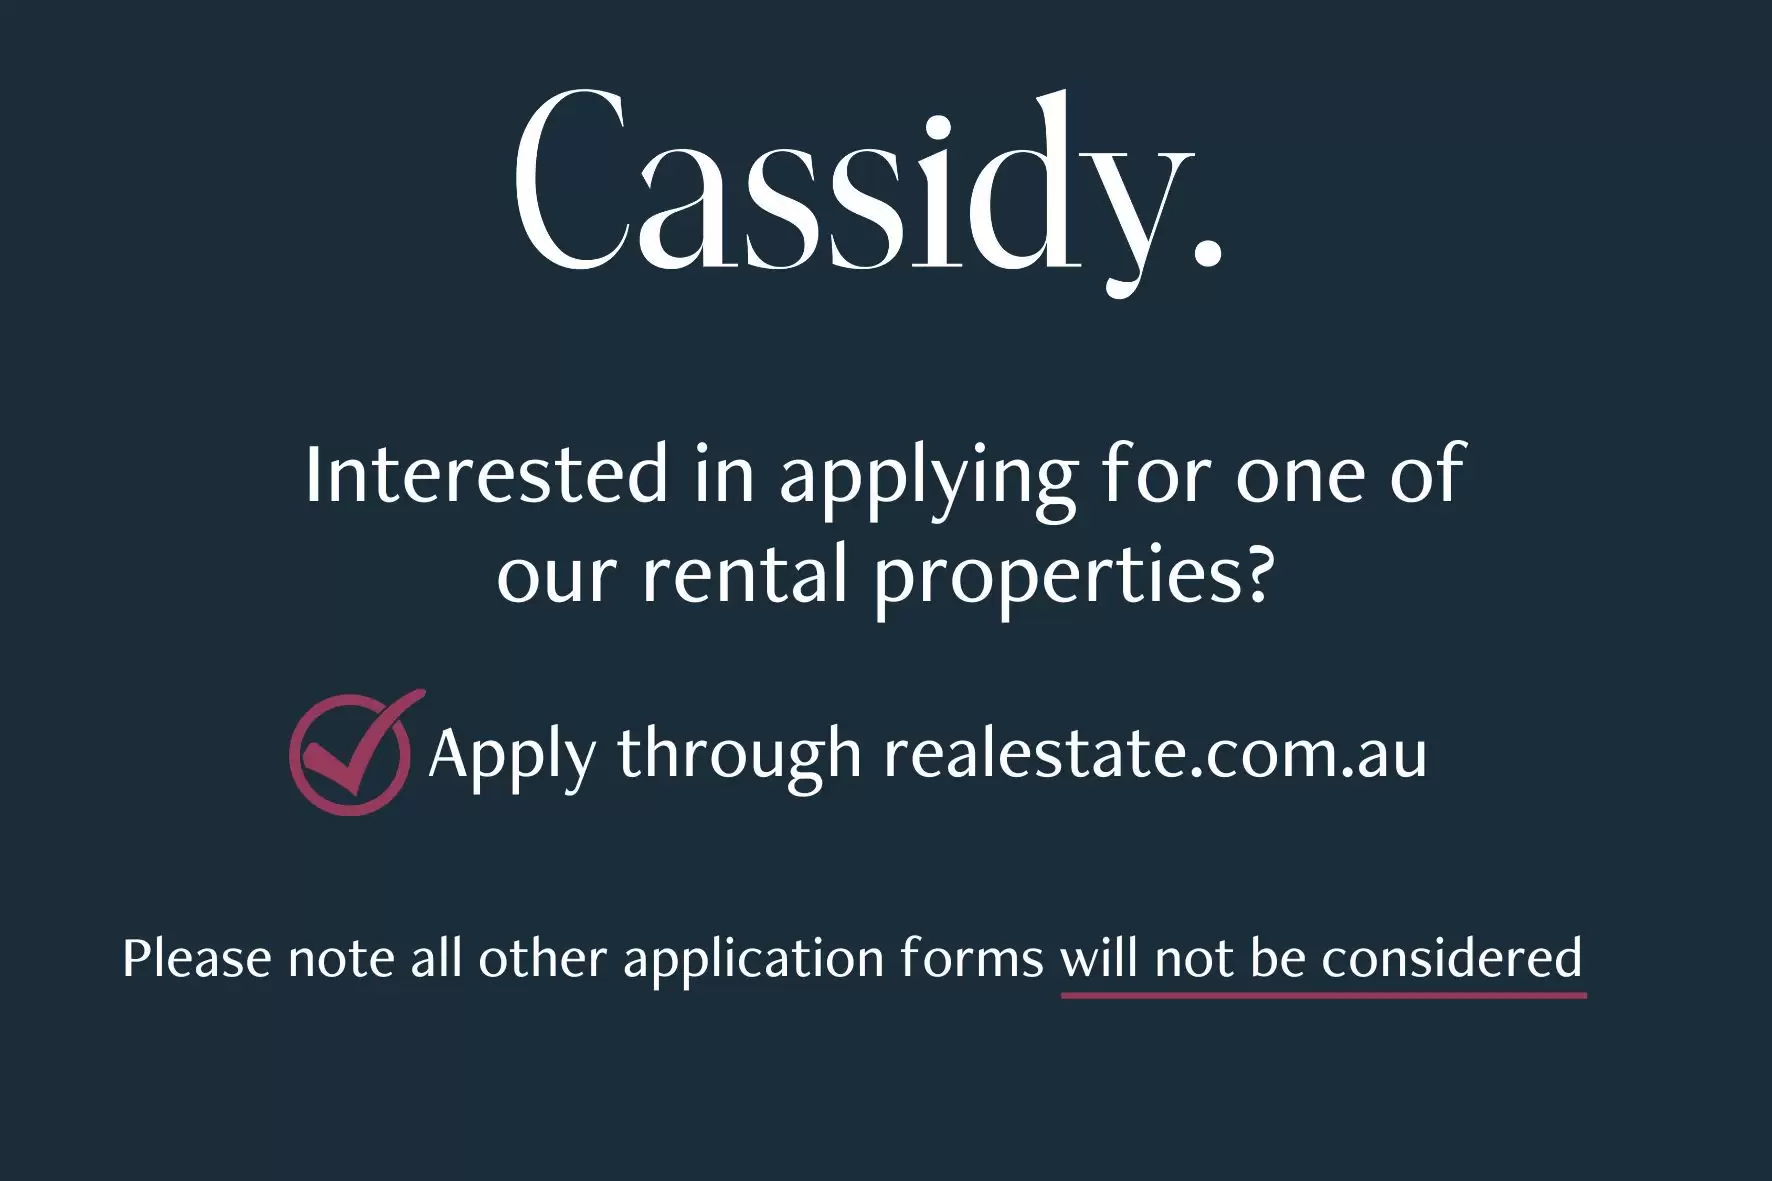 21/5 Stansell Street, Gladesville For Lease by Cassidy Real Estate - image 1